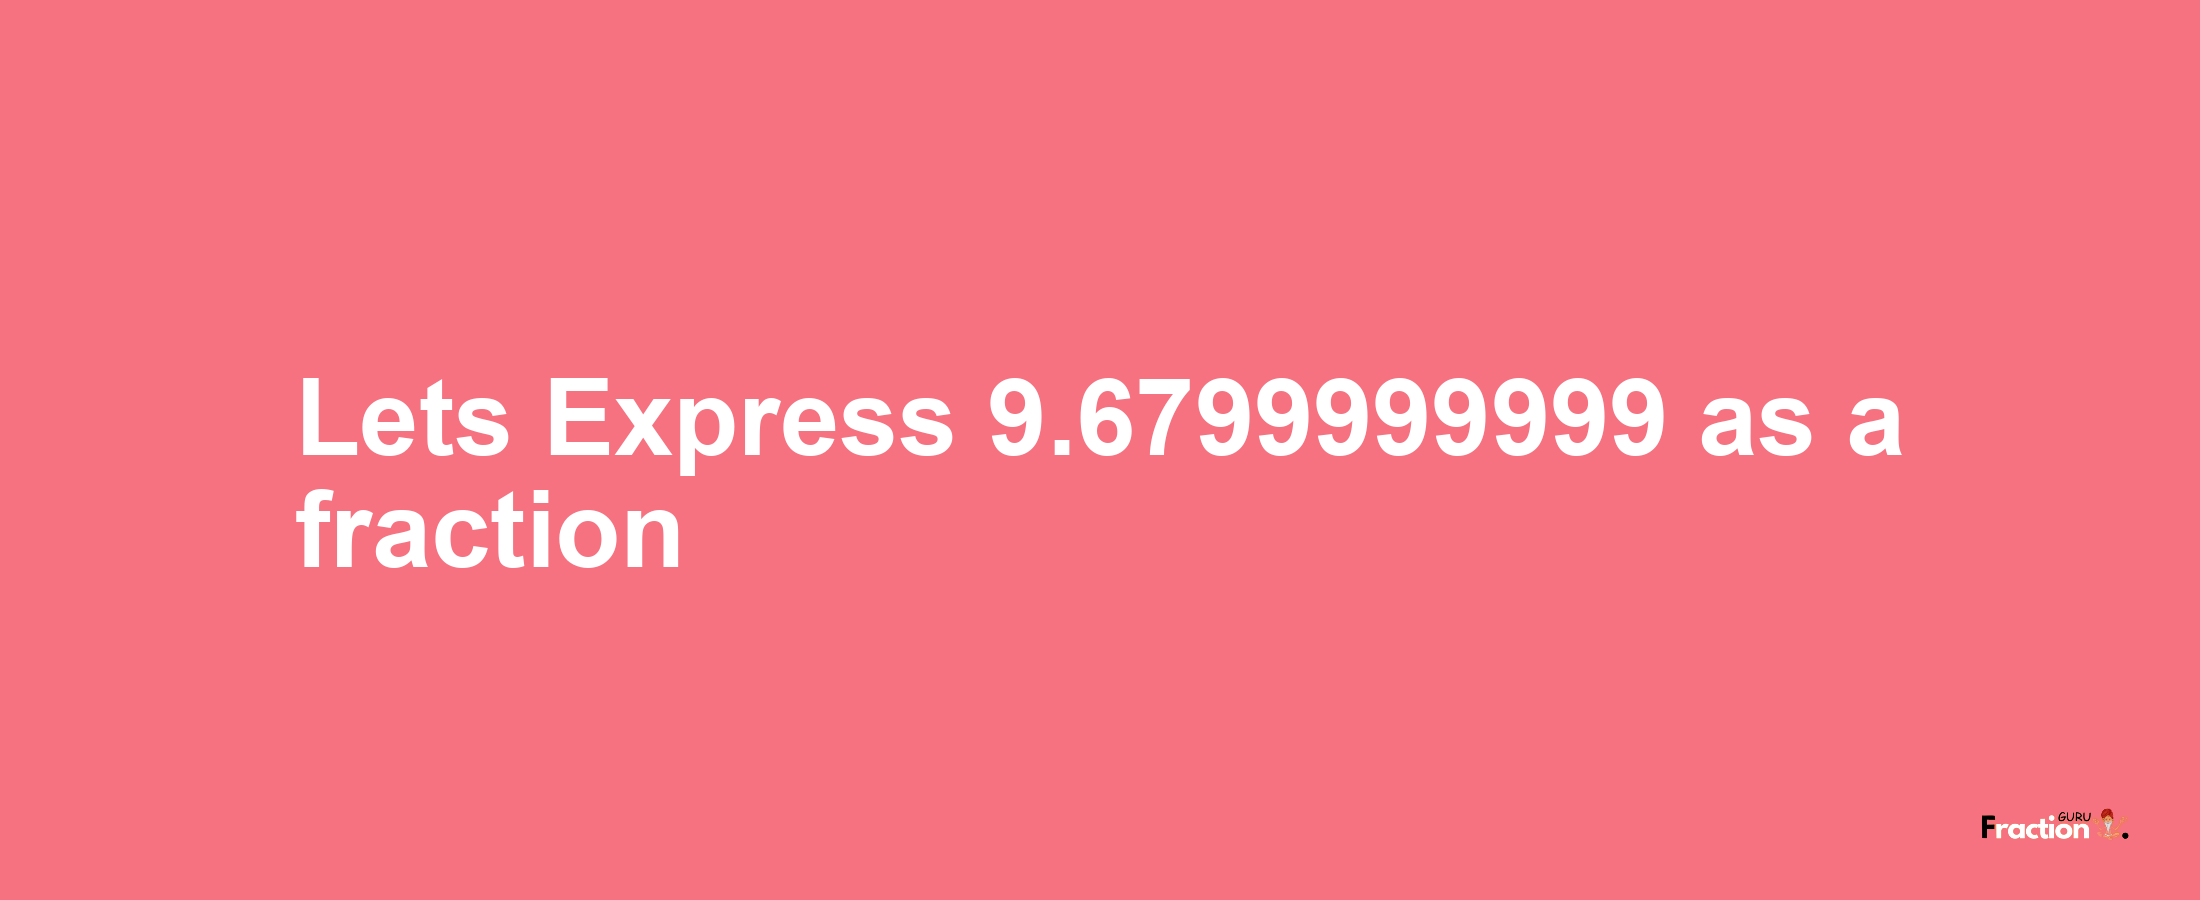 Lets Express 9.6799999999 as afraction